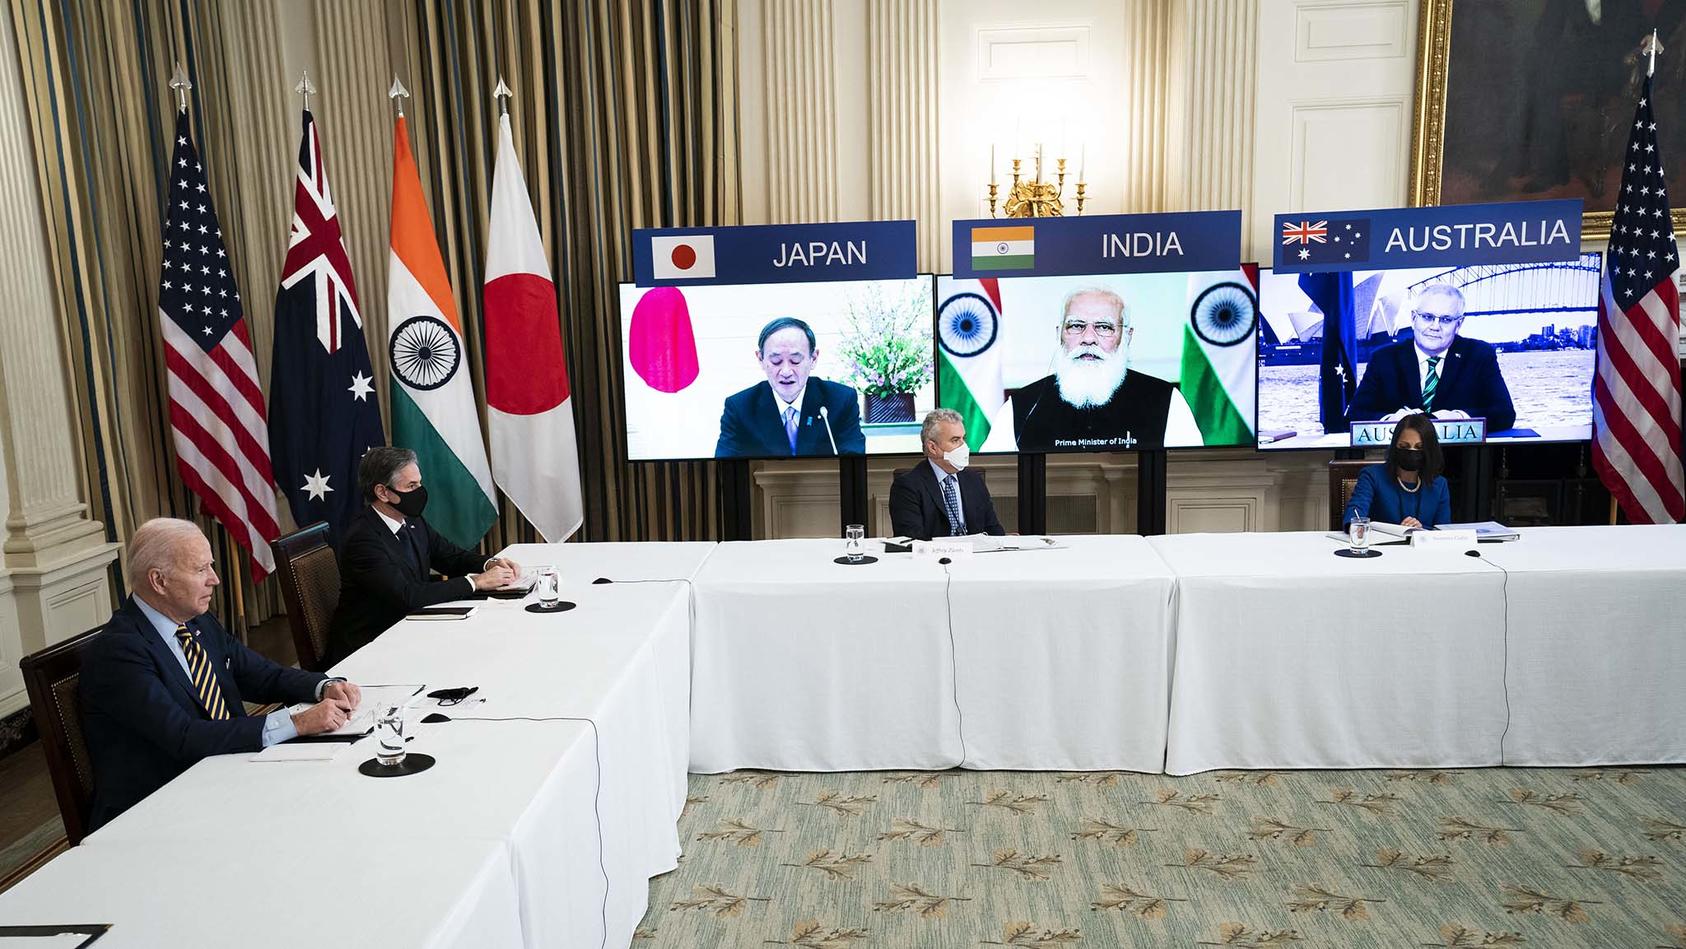 President Biden and Vice President Harris meet virtually with Prime Minister Yoshihide Suga of Japan, Prime Minister Narendra Modi of India and Prime Minister Scott Morrison of Australia at the White House in Washington, March 12, 2021. (Doug Mills/The New York Times)